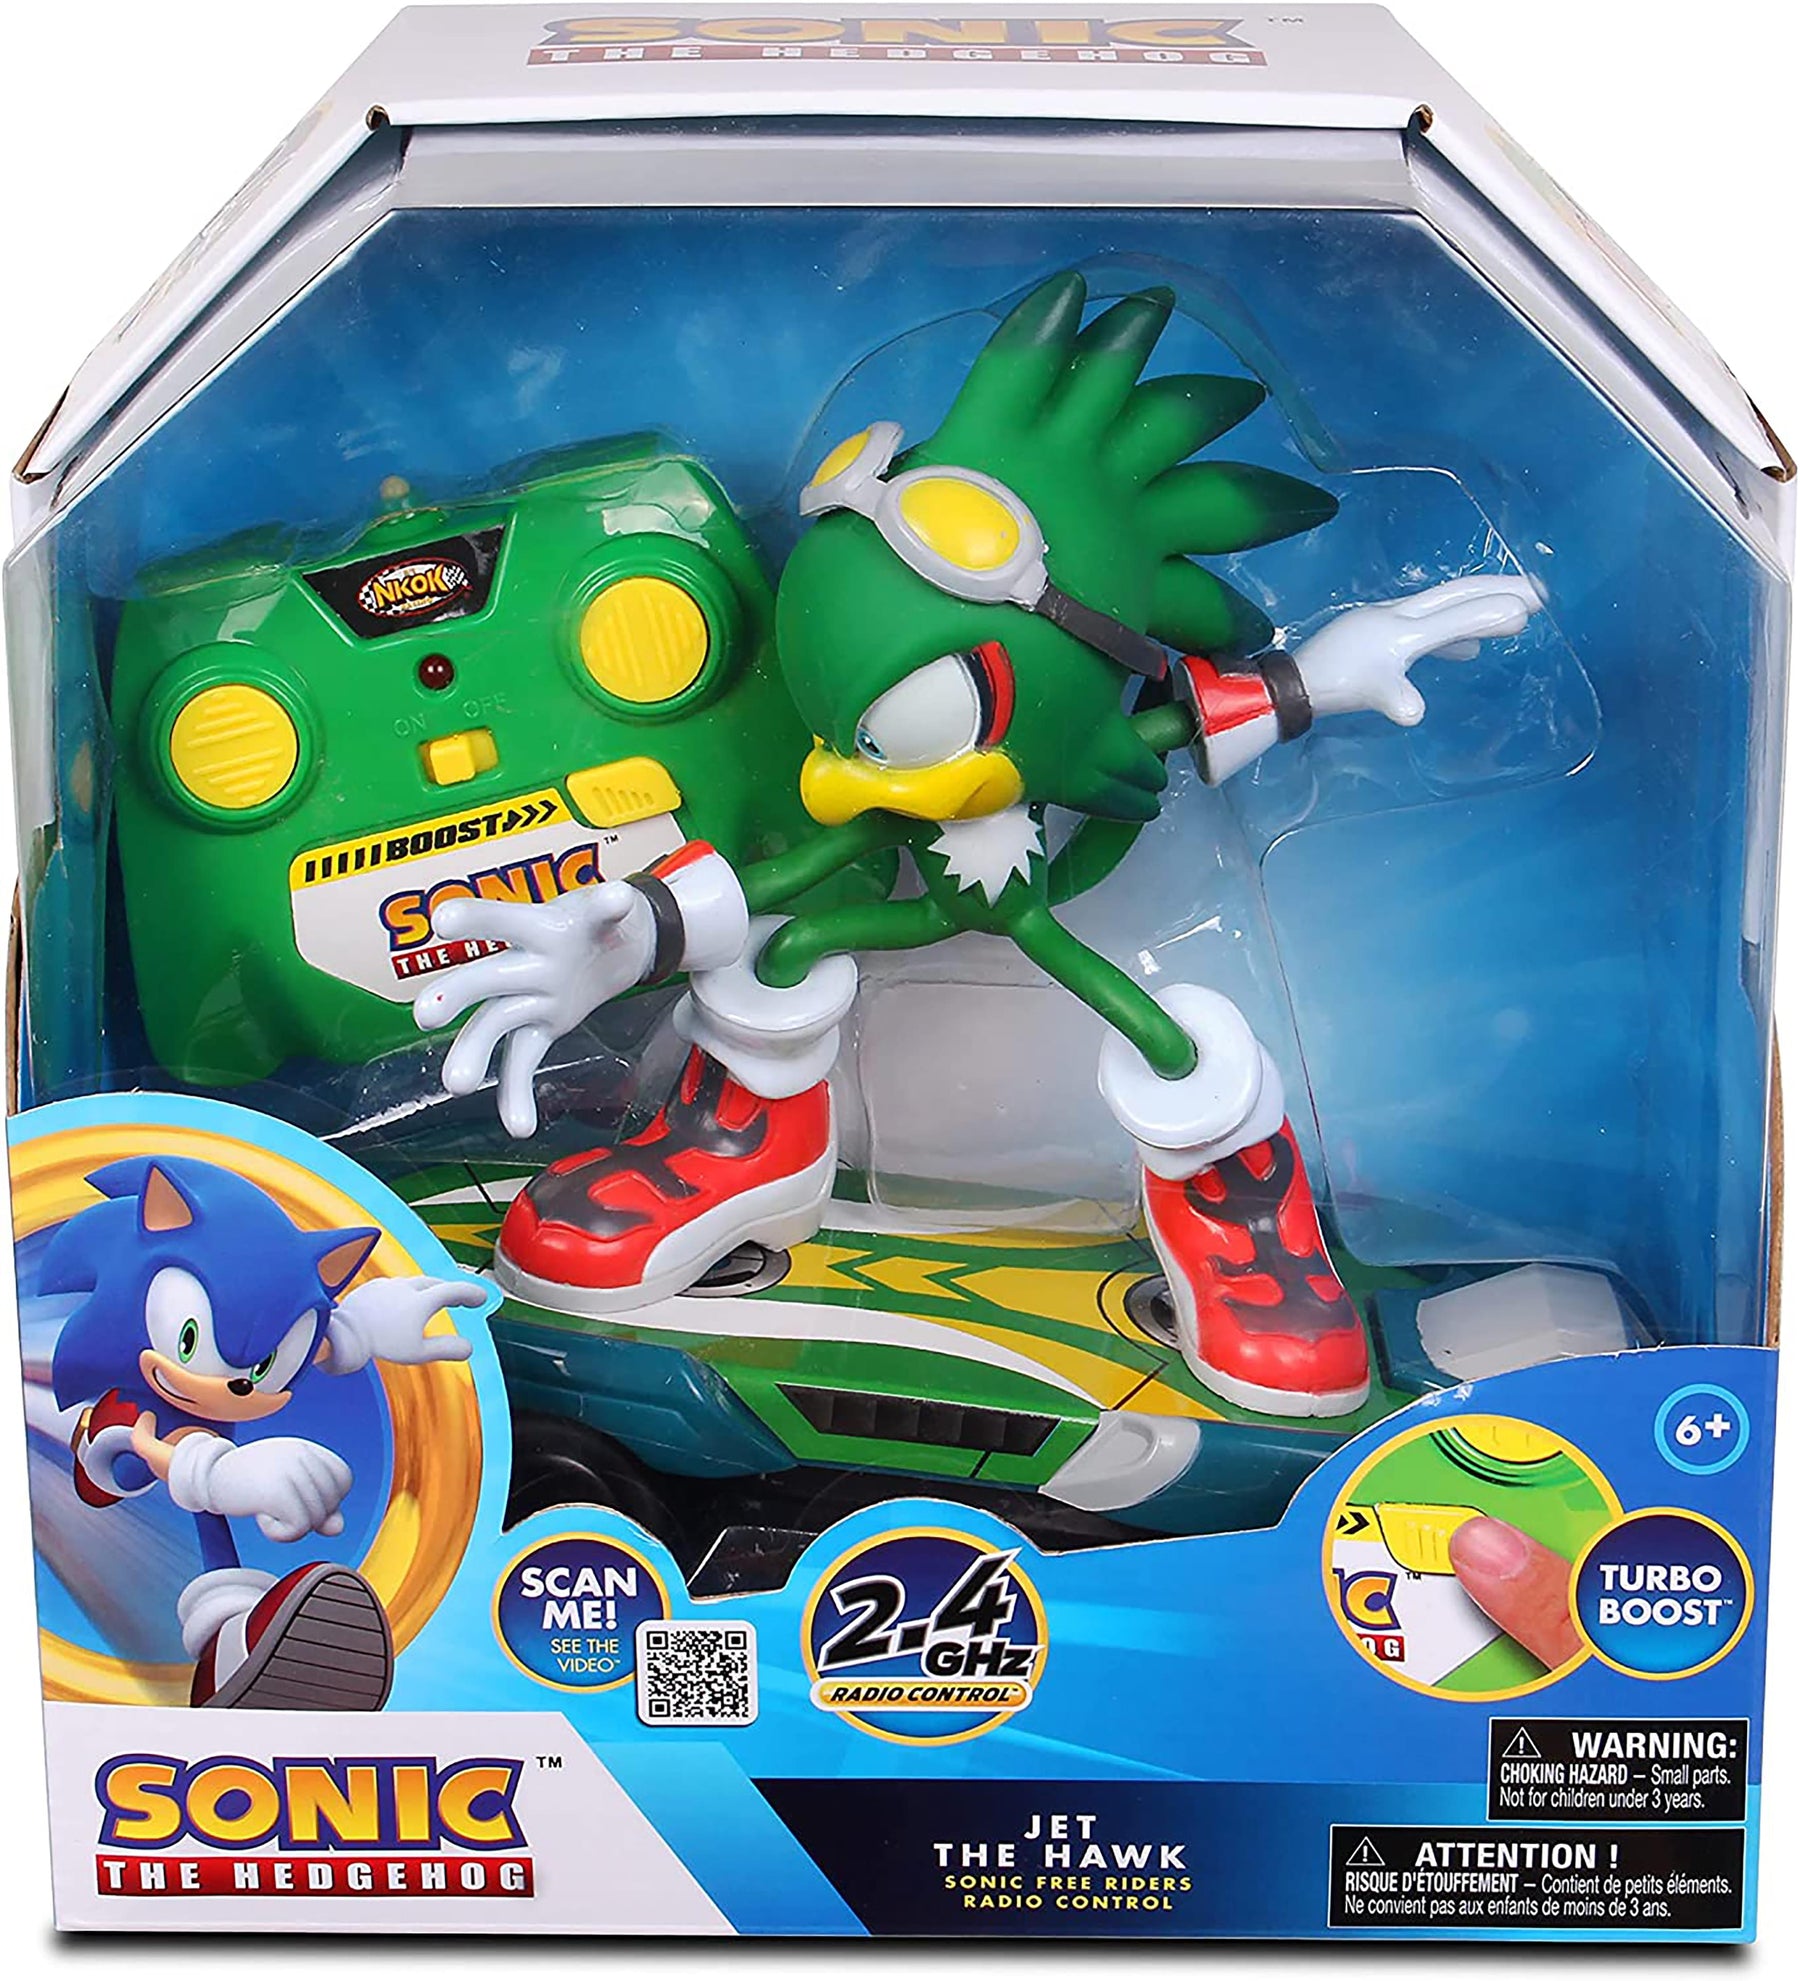 Sonic Racing 2.4Ghz Remote Controlled Car w/ Turbo Boost | Jet the Hawk